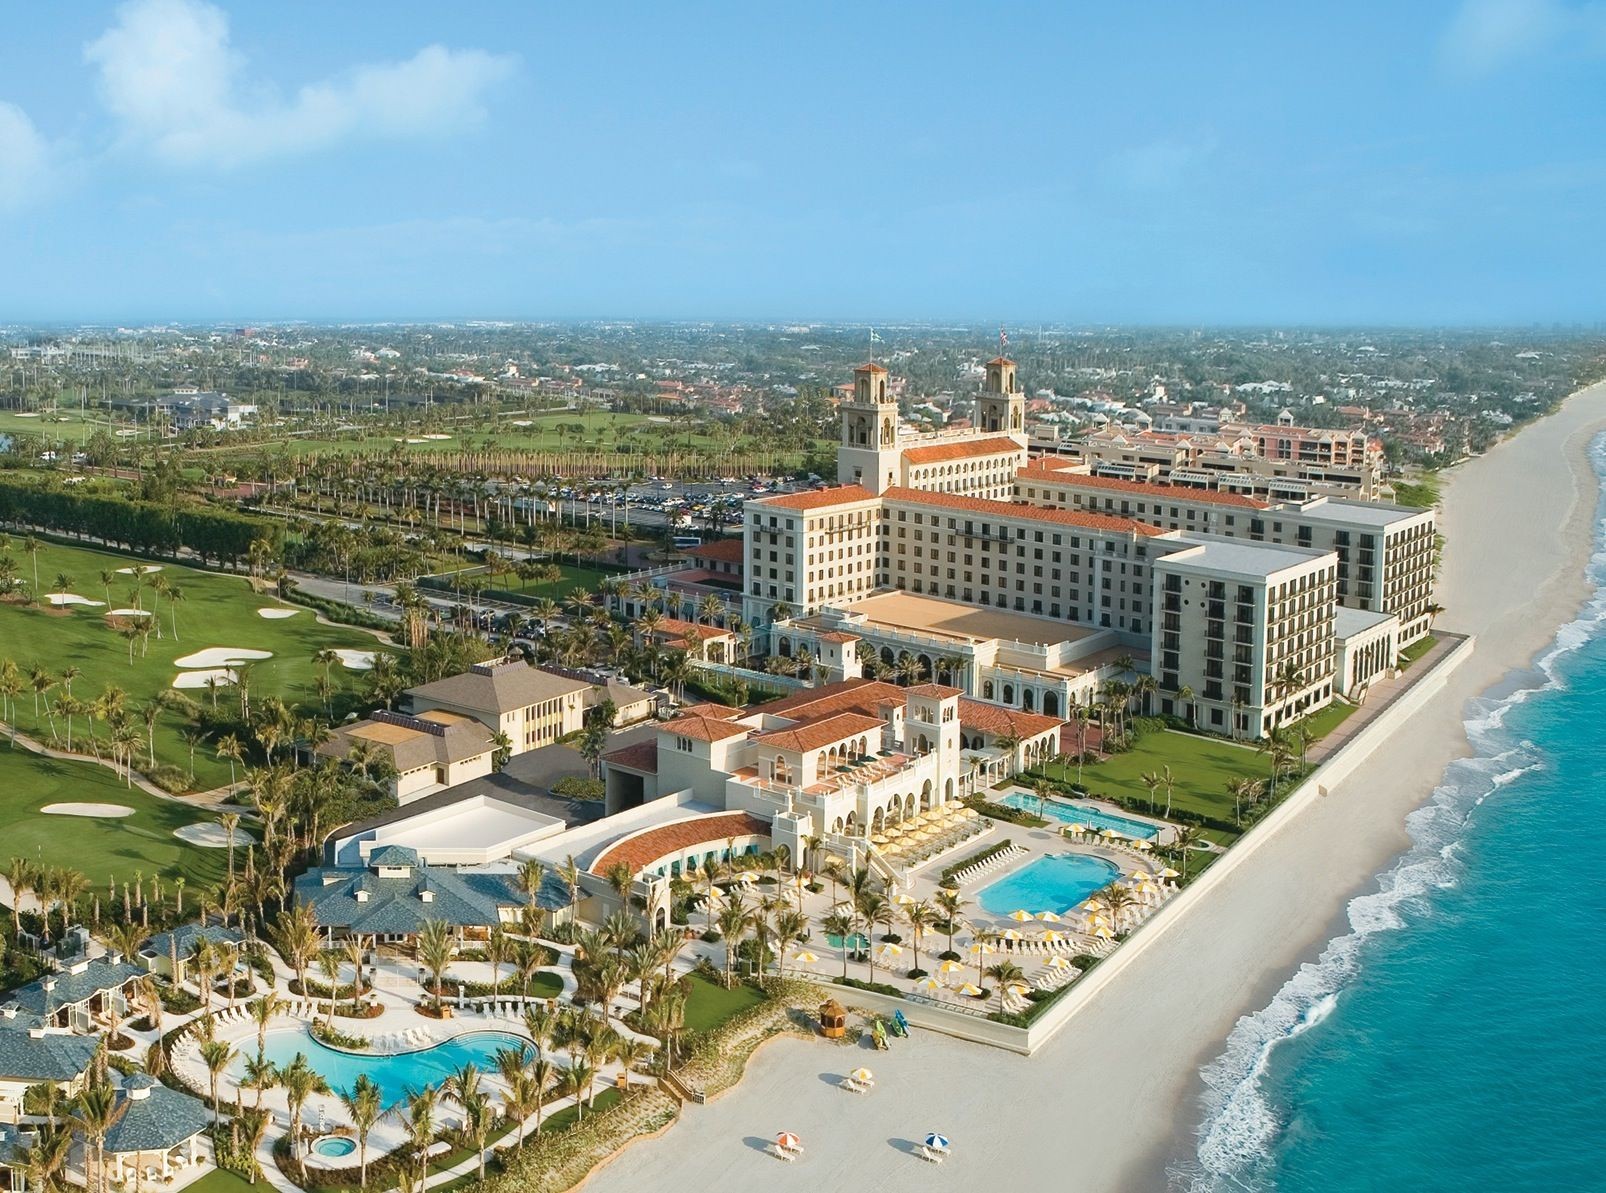 Historic Grand Hotels - One Night Palm Beach Florida's Breakers Hotel